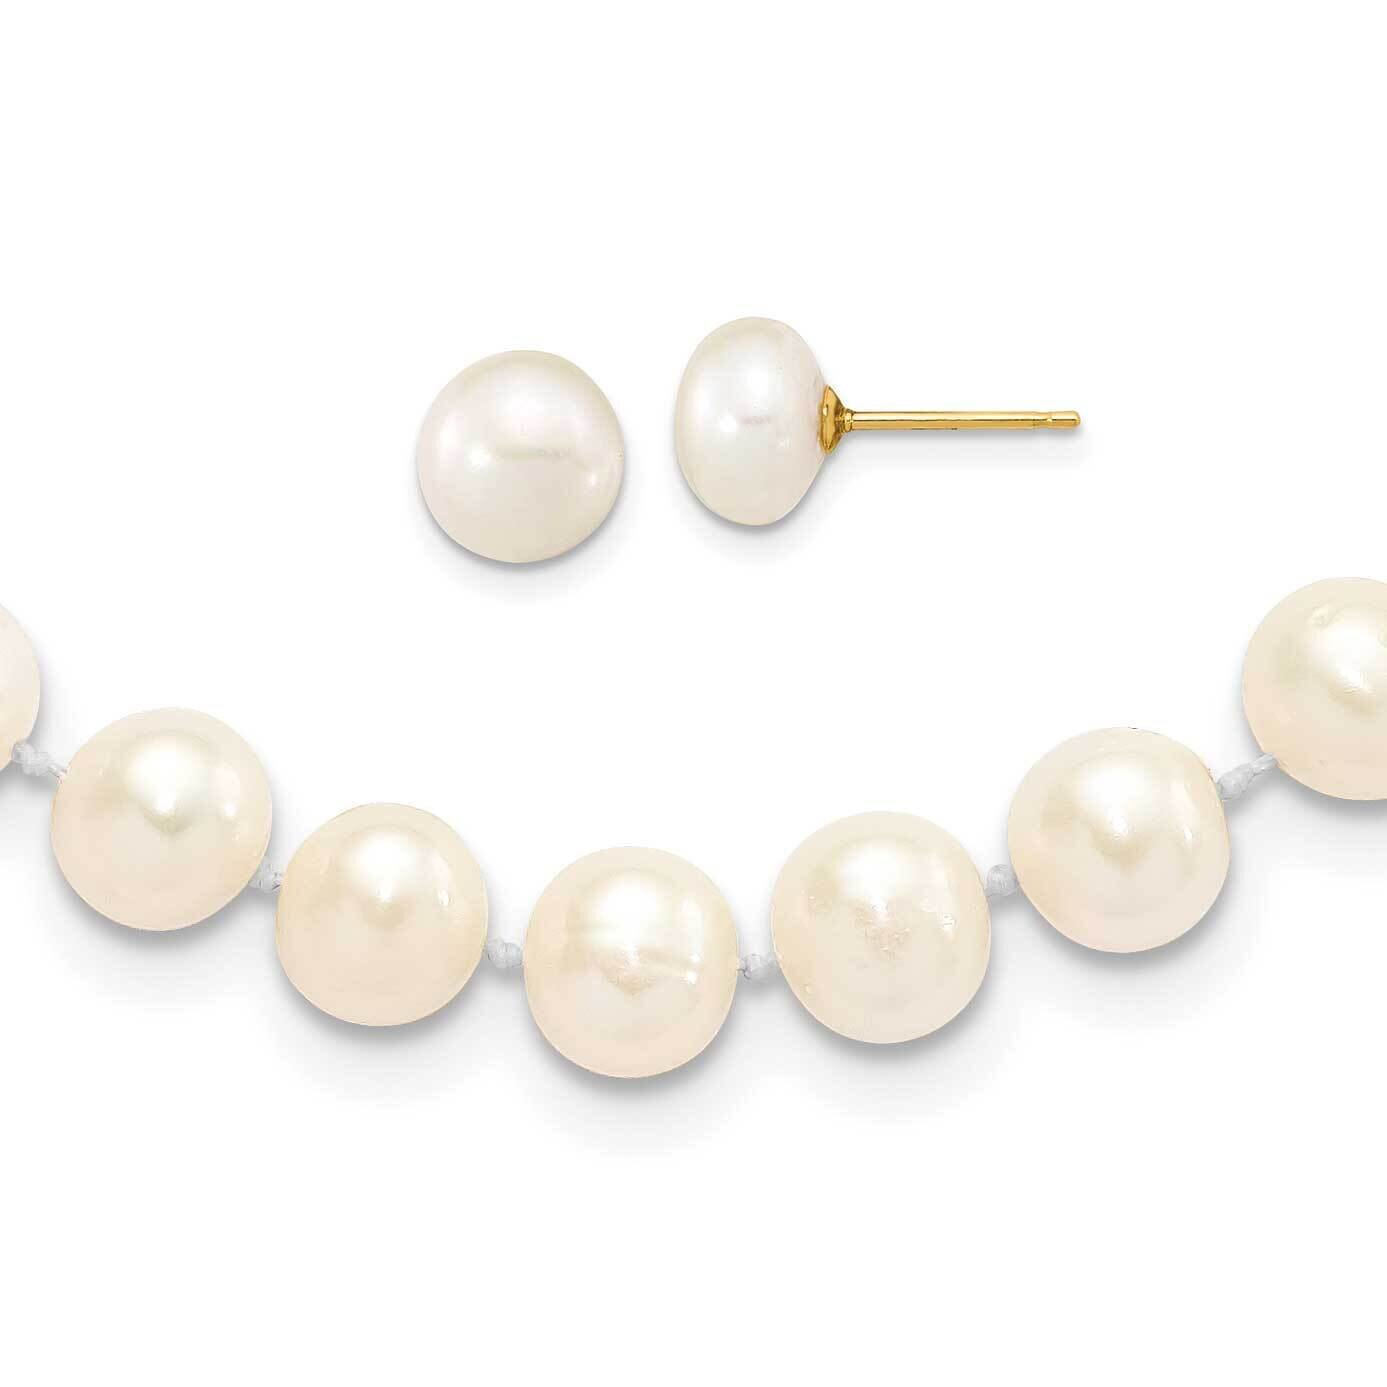 7-8mm Near Round White Cultured Freshwater Pearl Necklace & Button Earring Set 14k Gold XF497WSET